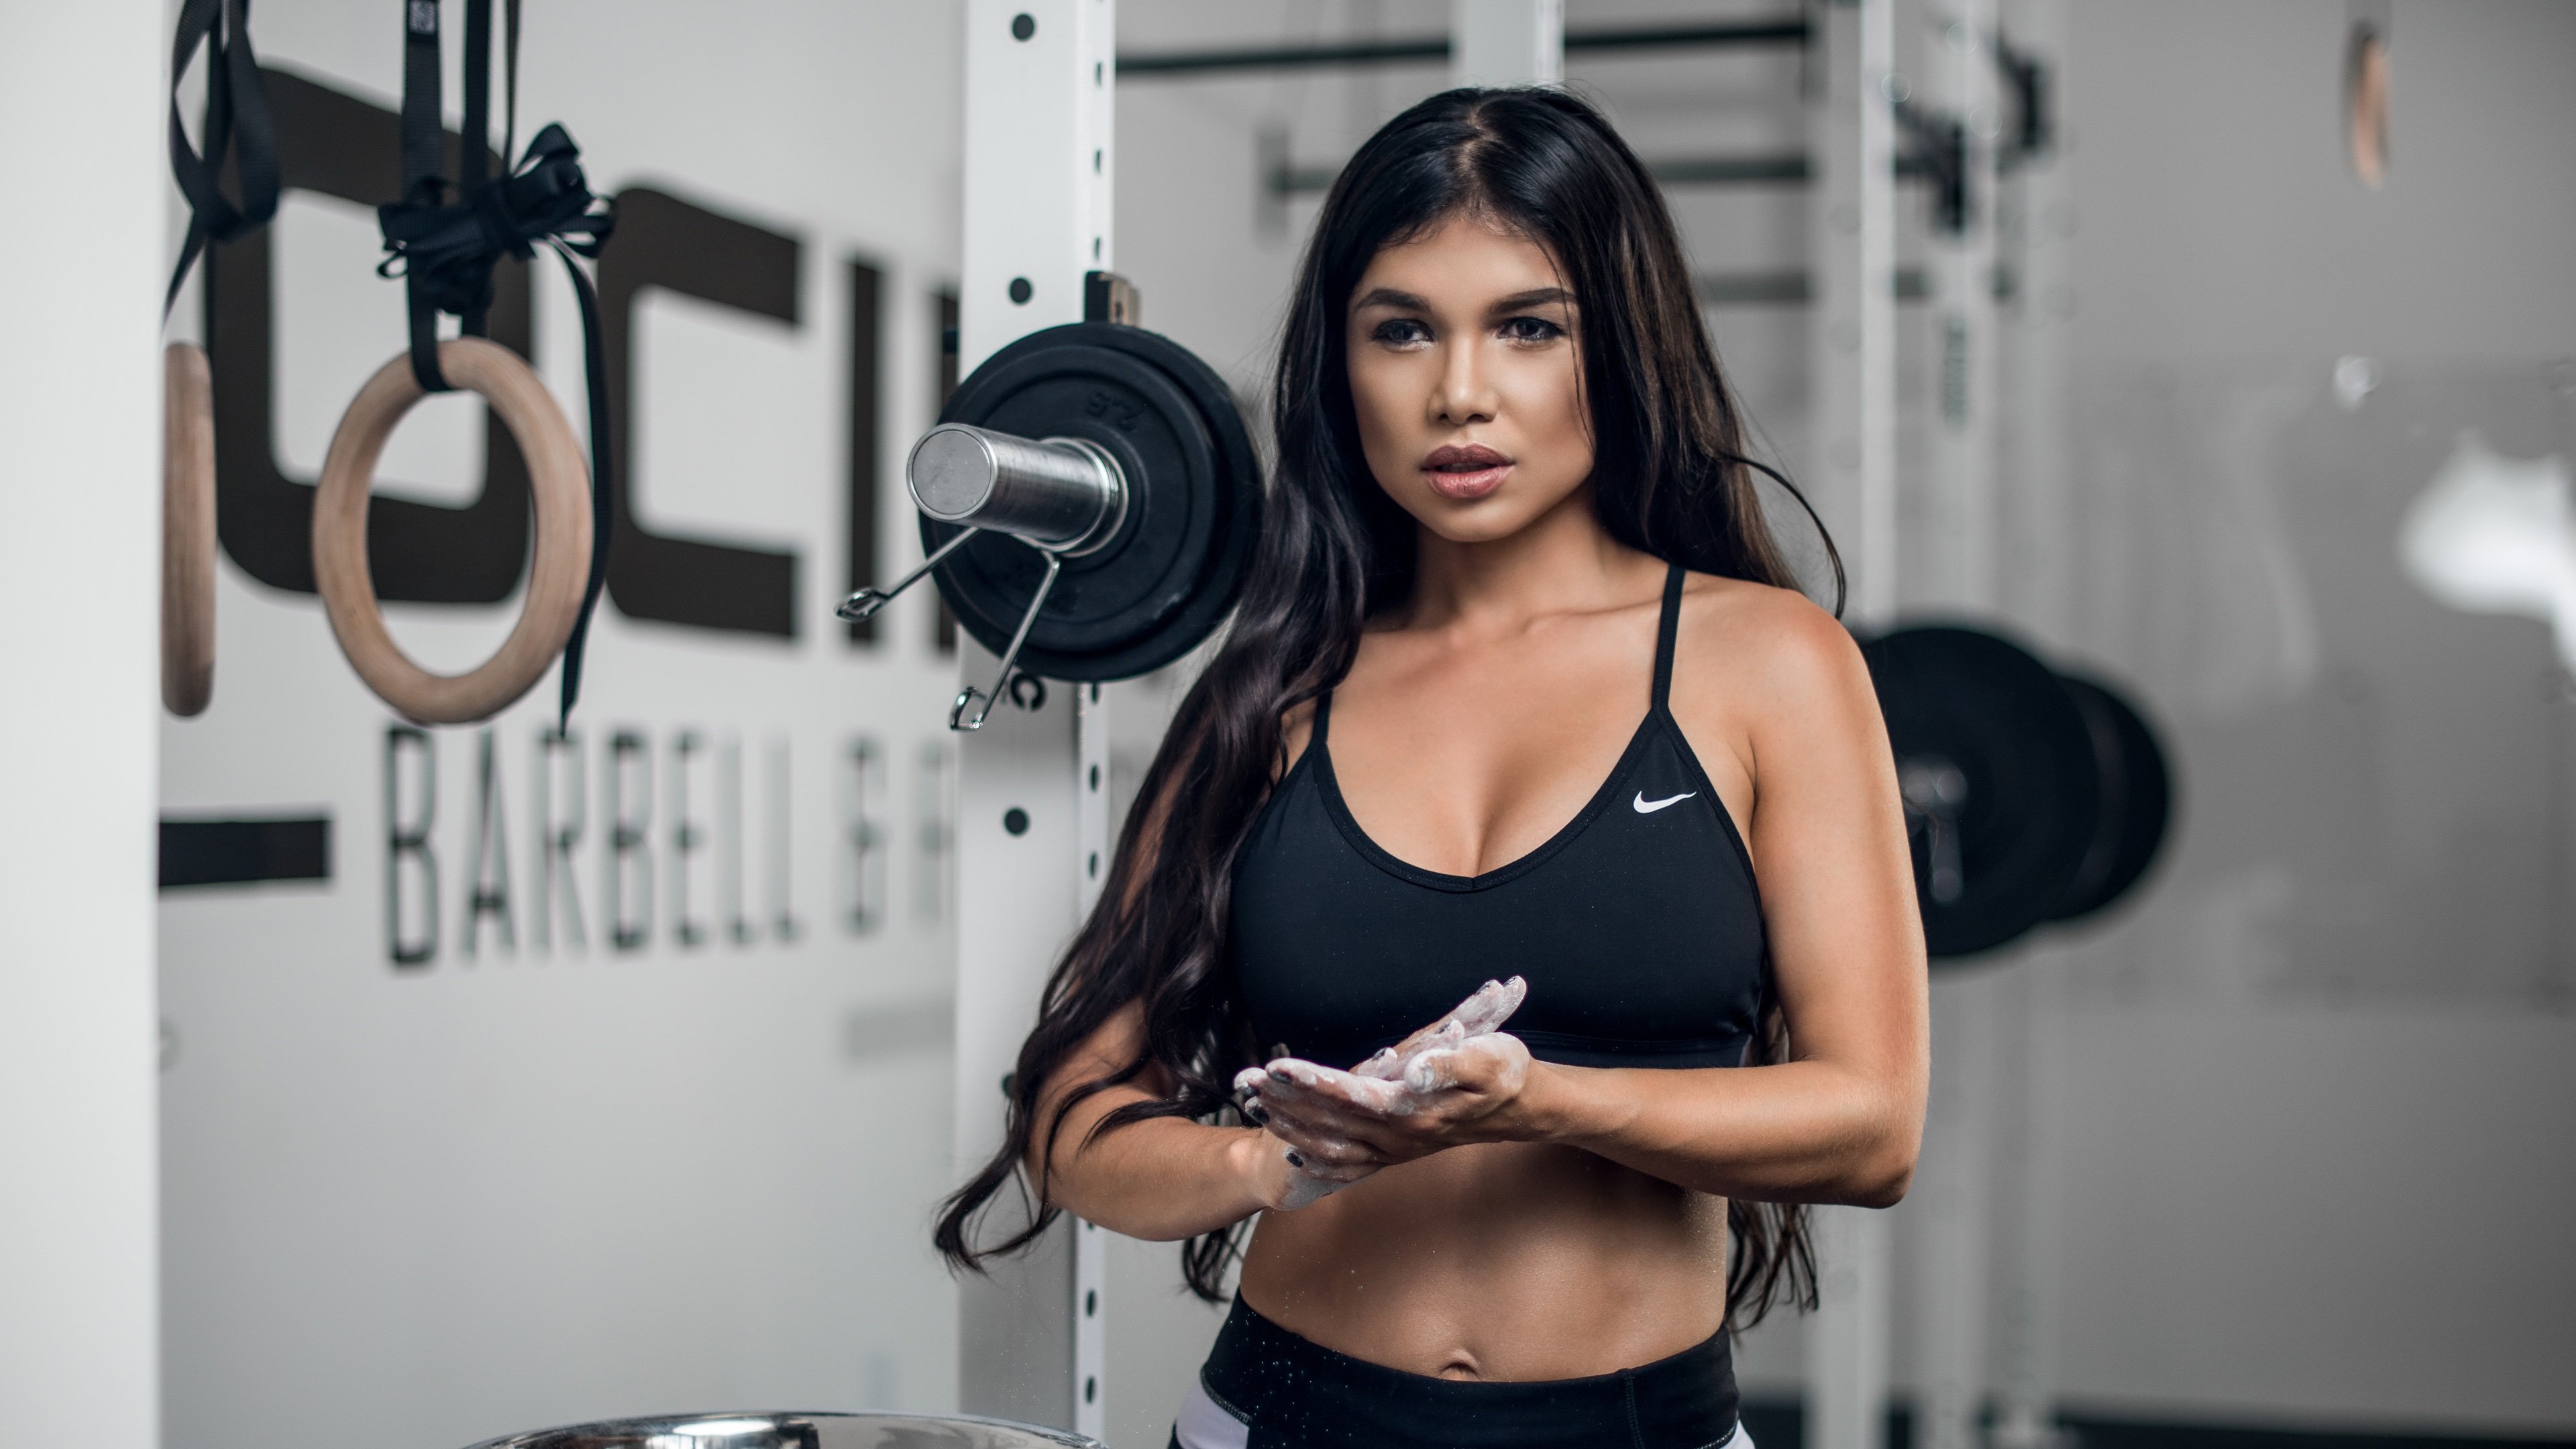 100 Gym Wallpapers HQ  Download Free Images On Unsplash